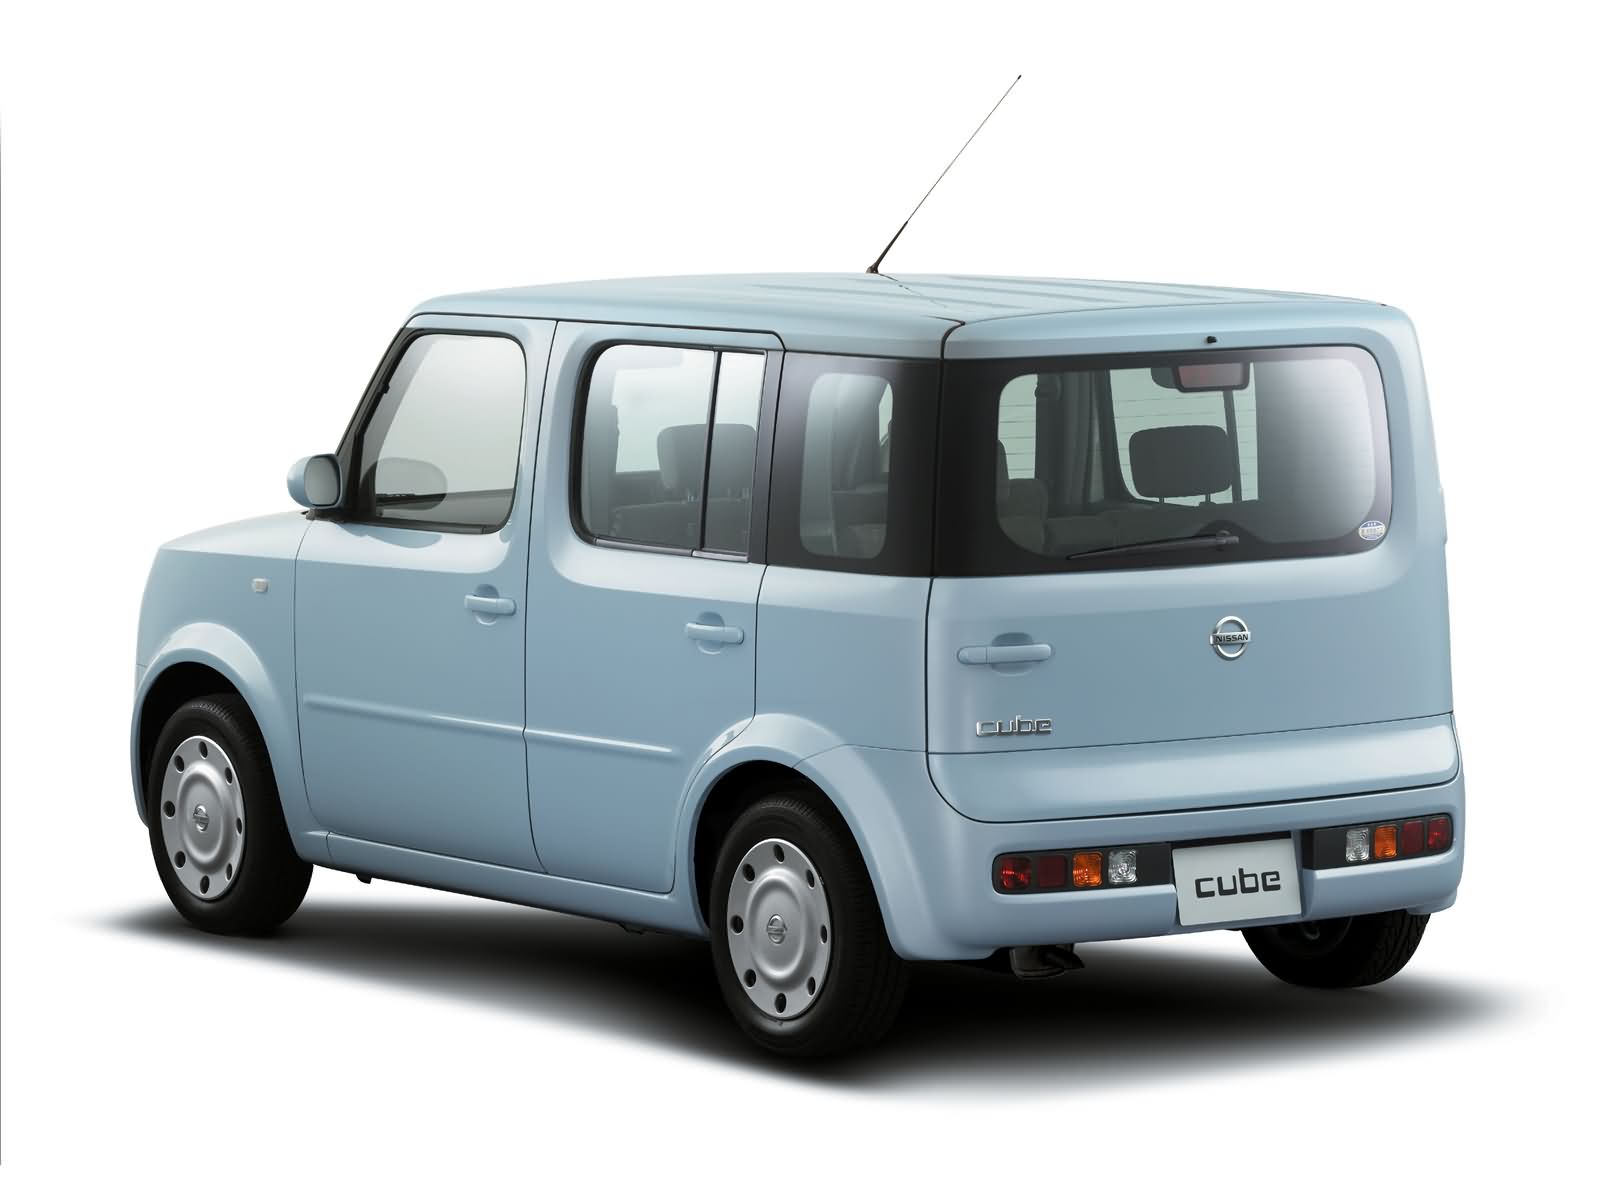 Nissan cube photo gallery #4